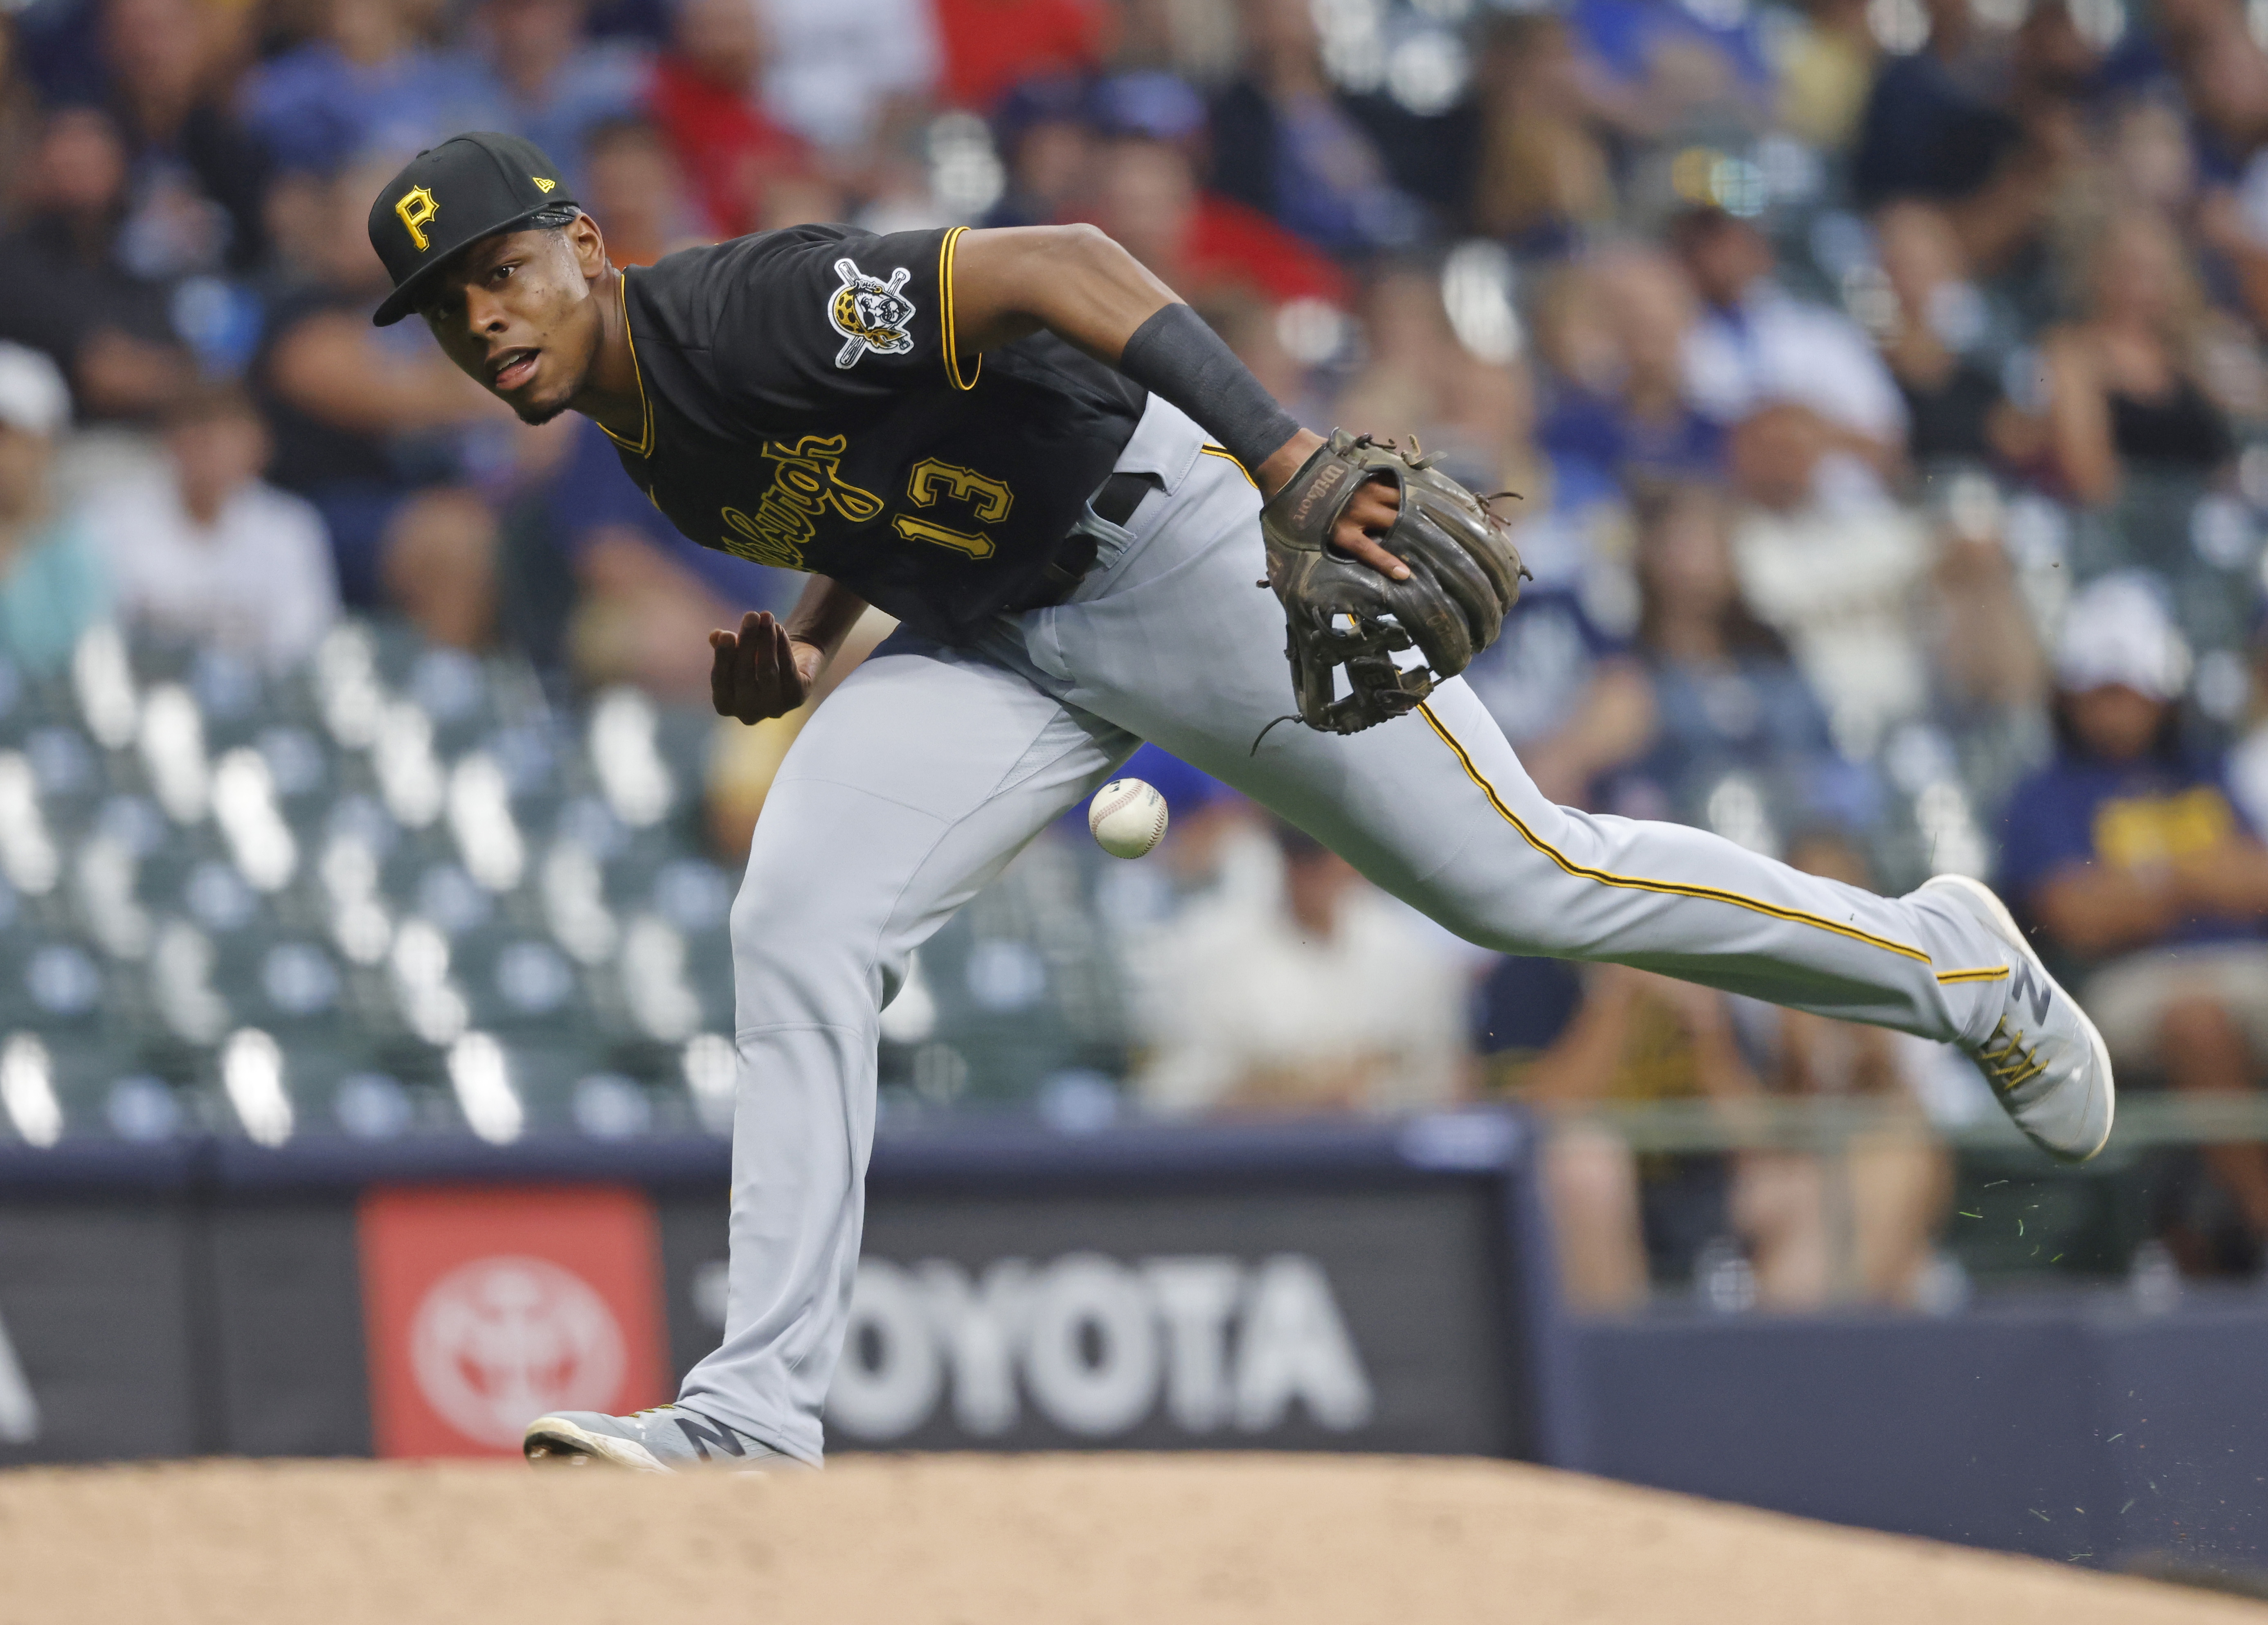 Pirates 3B Hayes eyes smoother 2022 after rocky rookie year